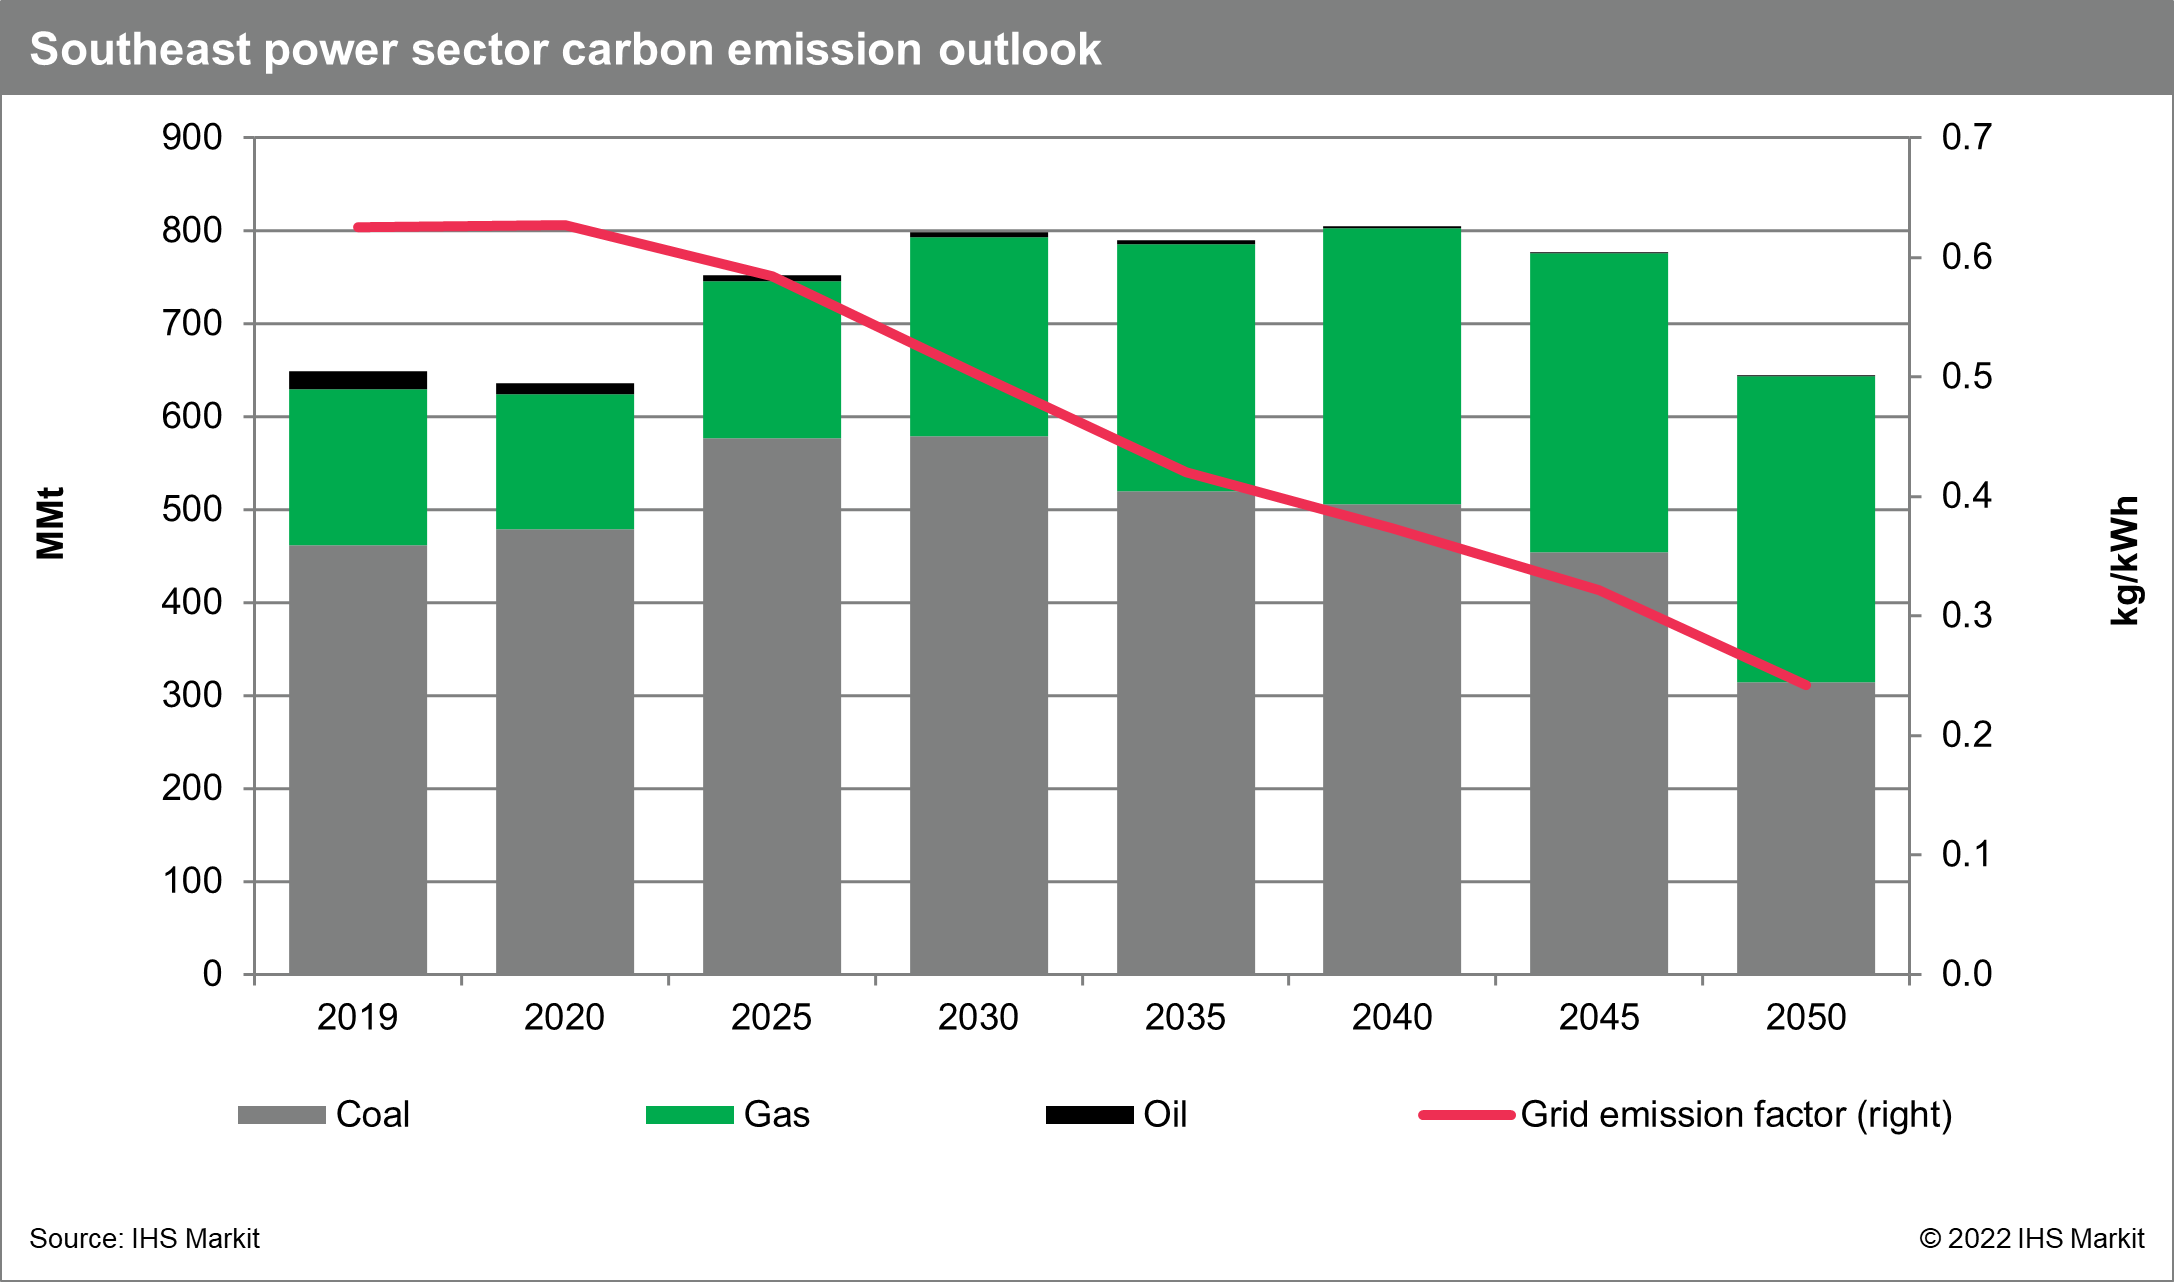 Southeast power sector carbon emission outlook